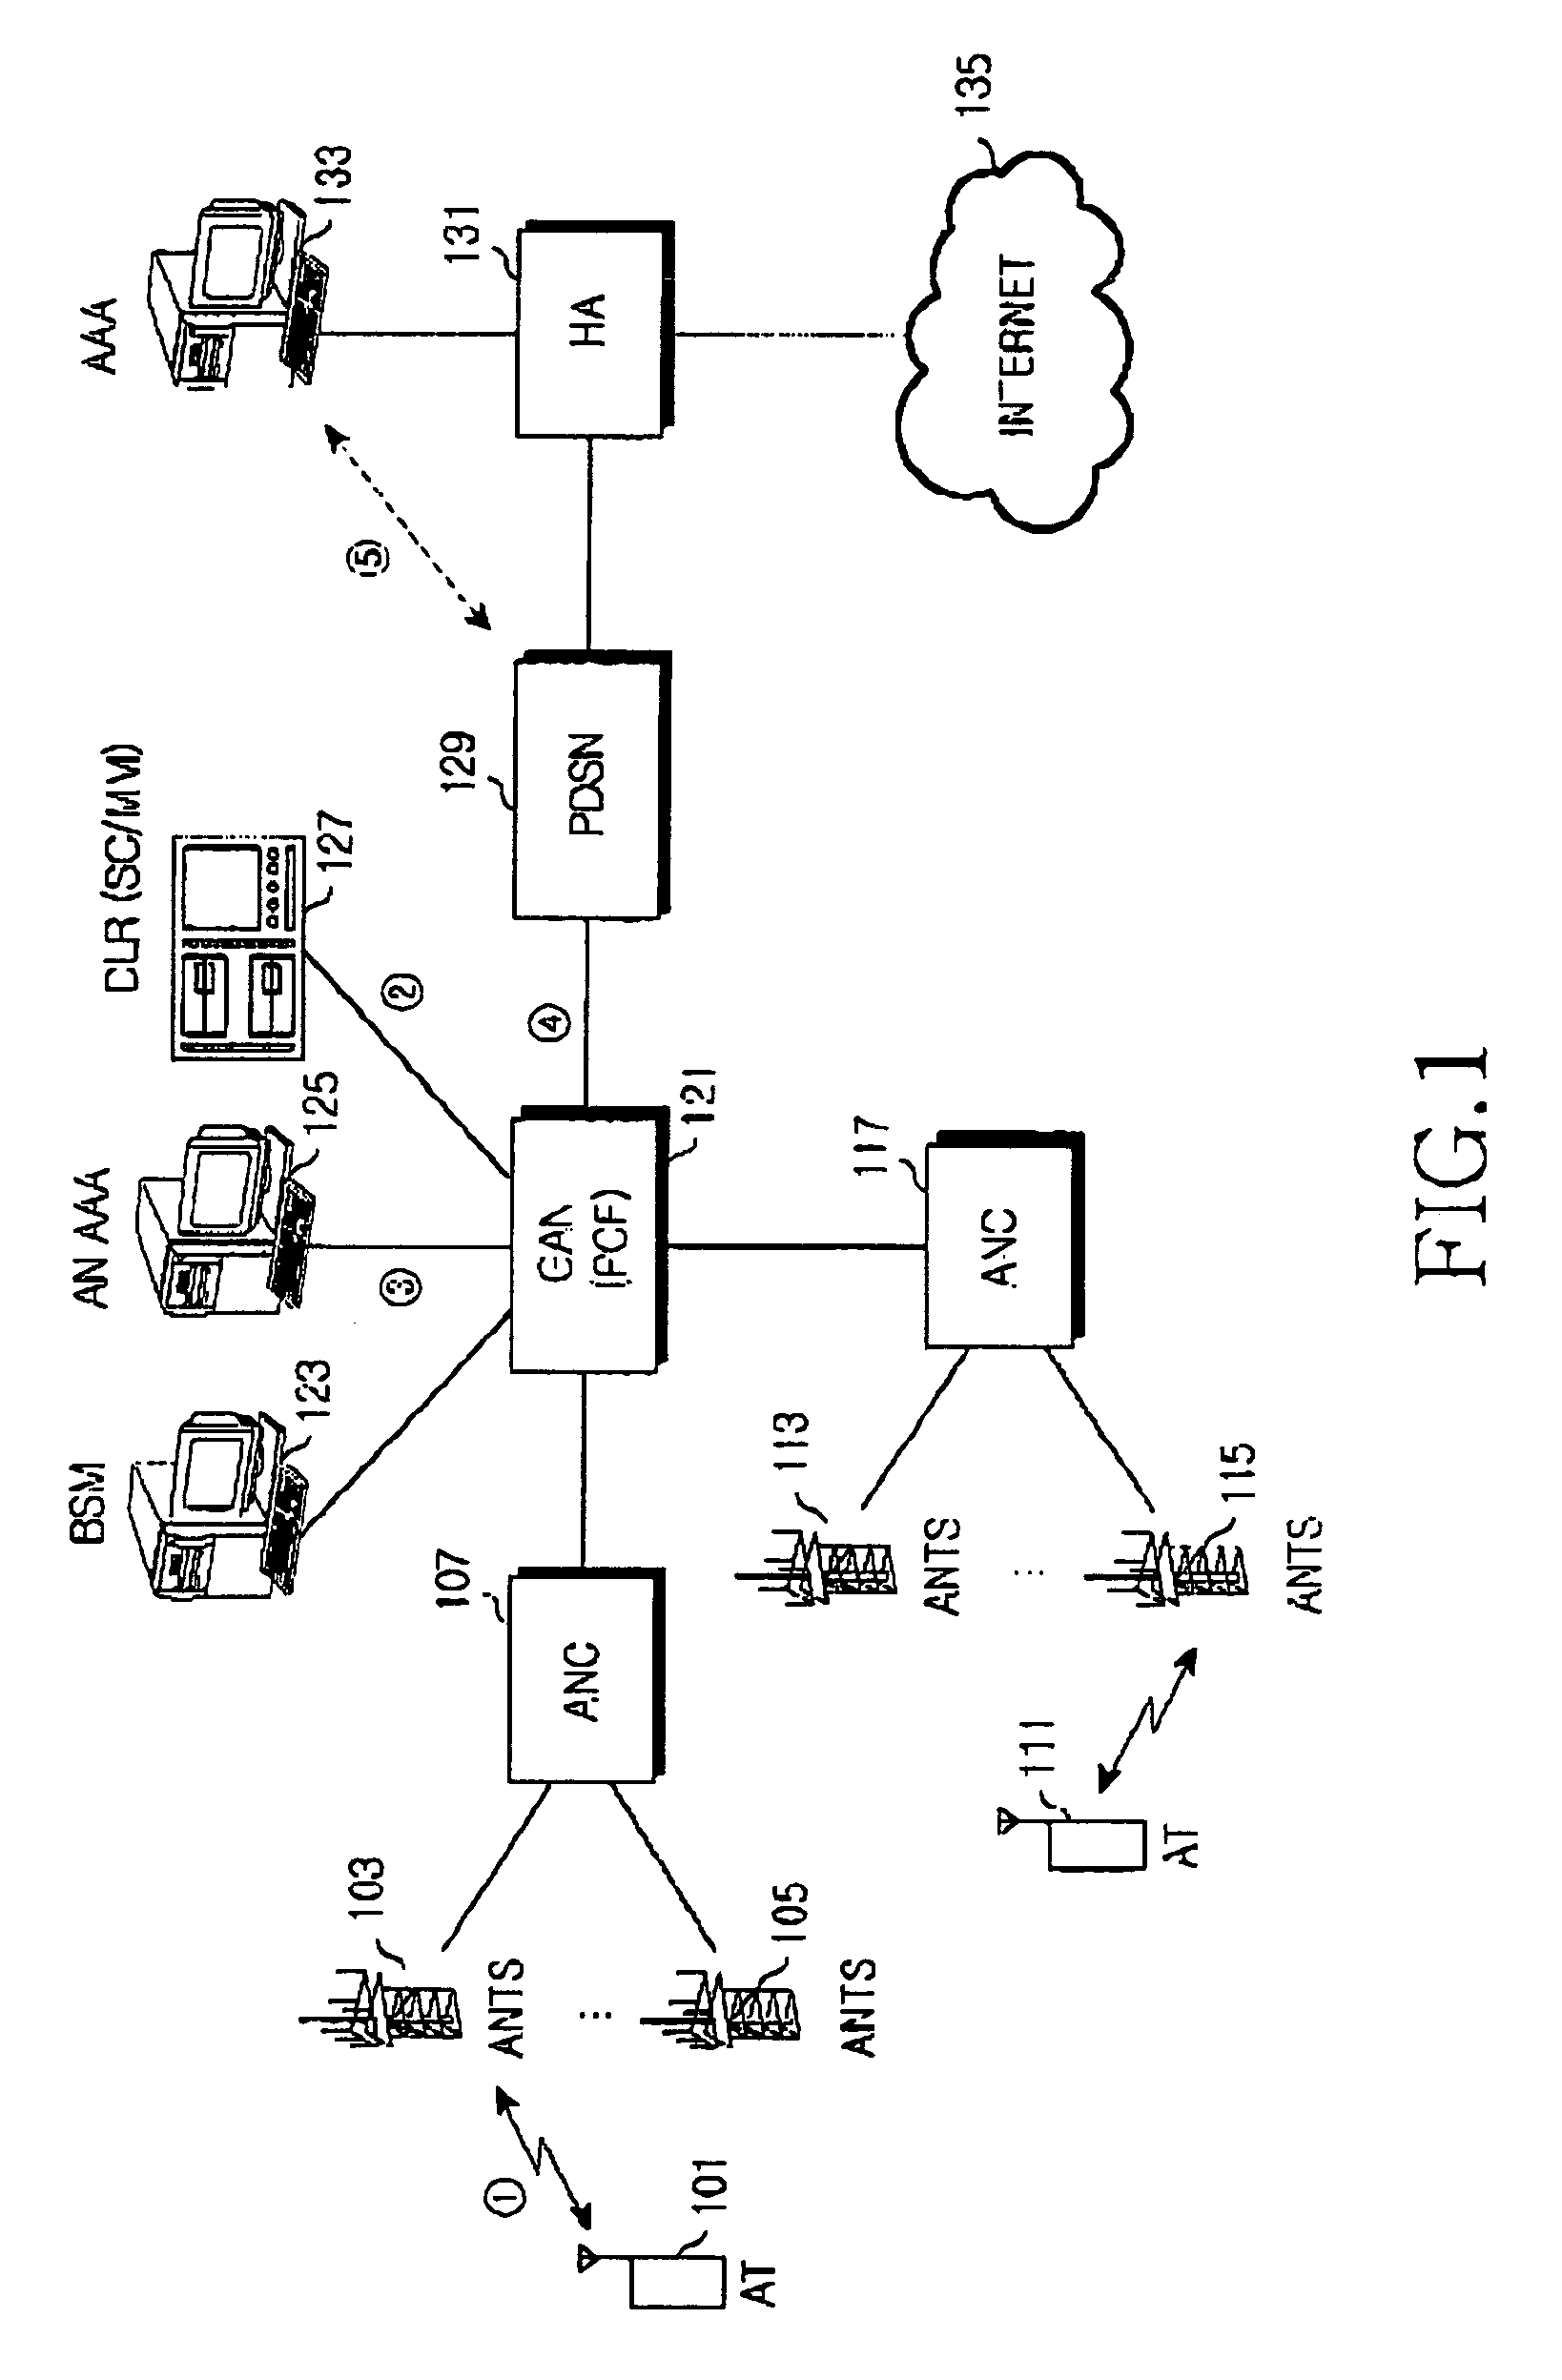 Method and apparatus for allocating an Unicast Access Terminal Identifier according to an access terminal's movement to subnet in a high-speed data dedicated system